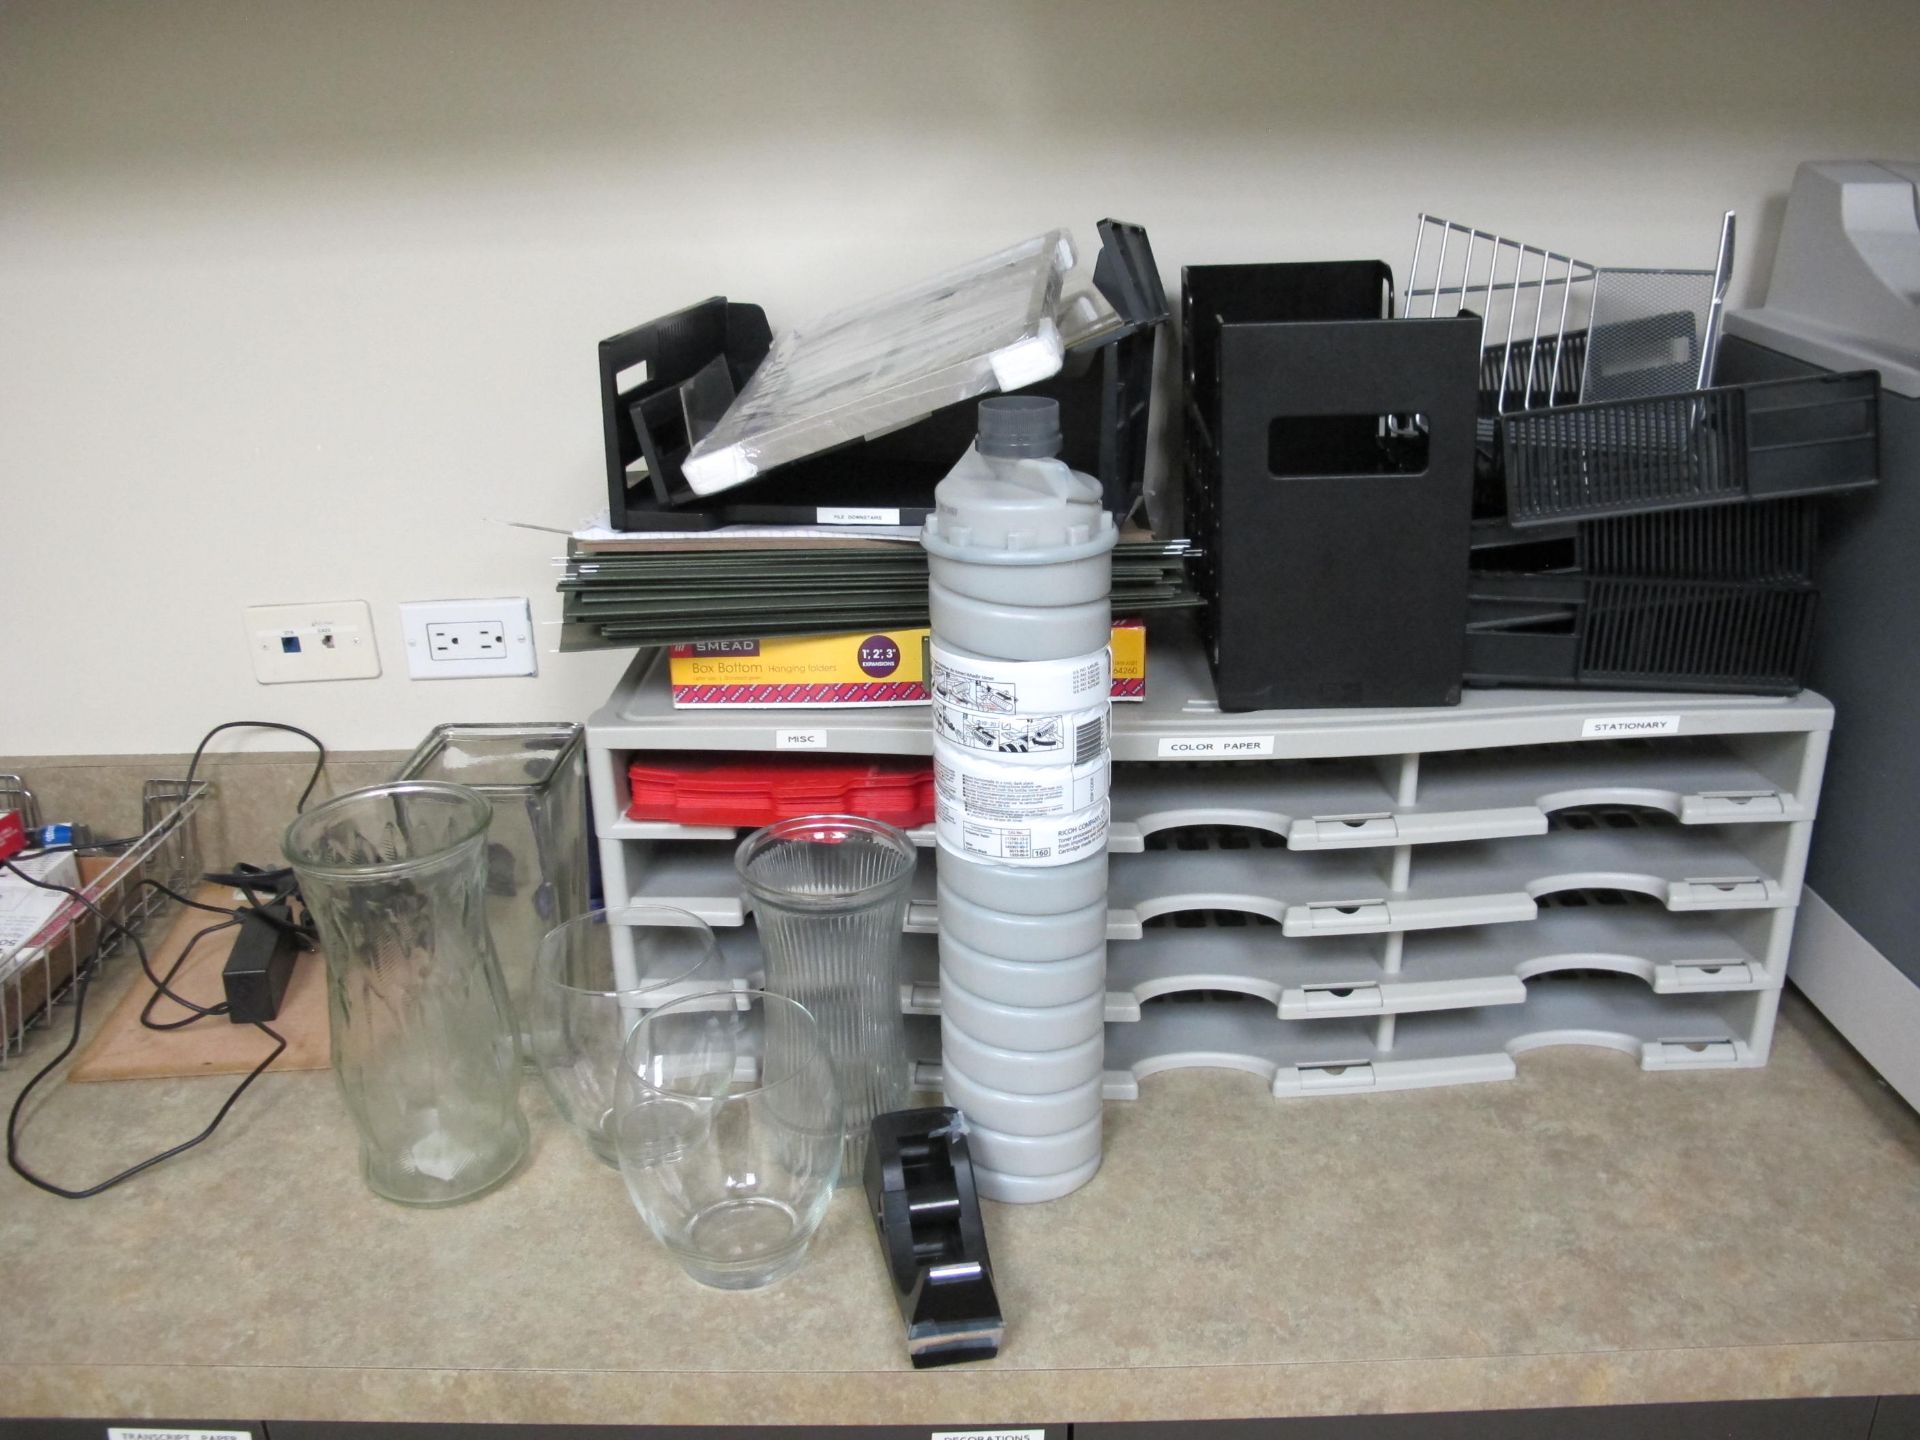 Contents of Room (including Mail Cubbies, Paper Organizers, Training Masters Active Learing - Image 2 of 5